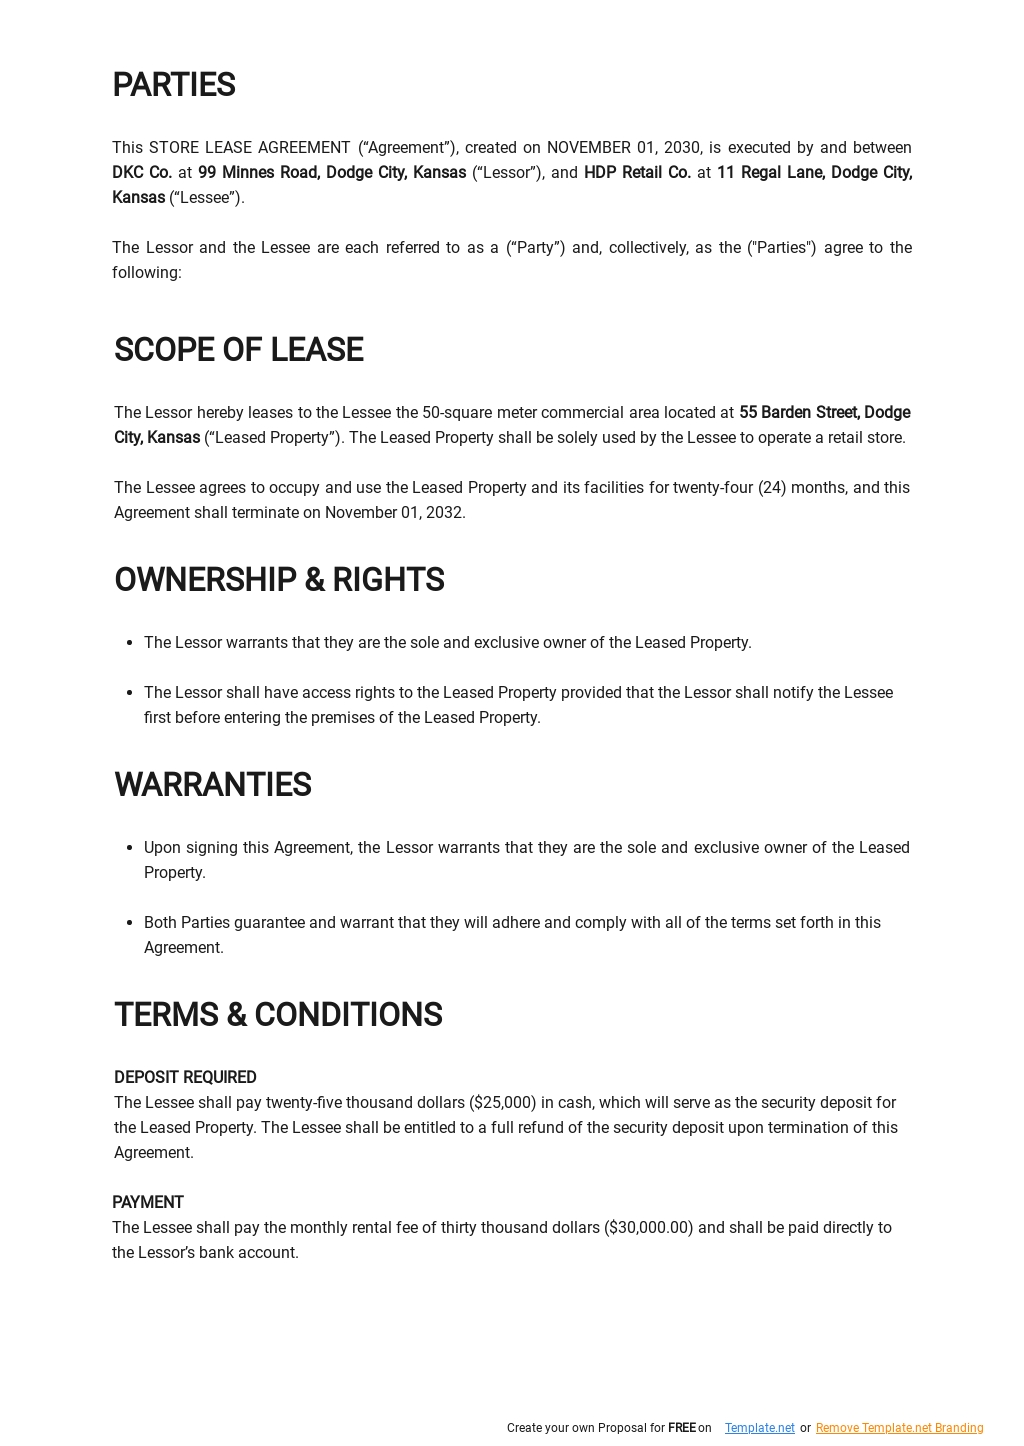 Standard Store Lease Agreement Template 1.jpe